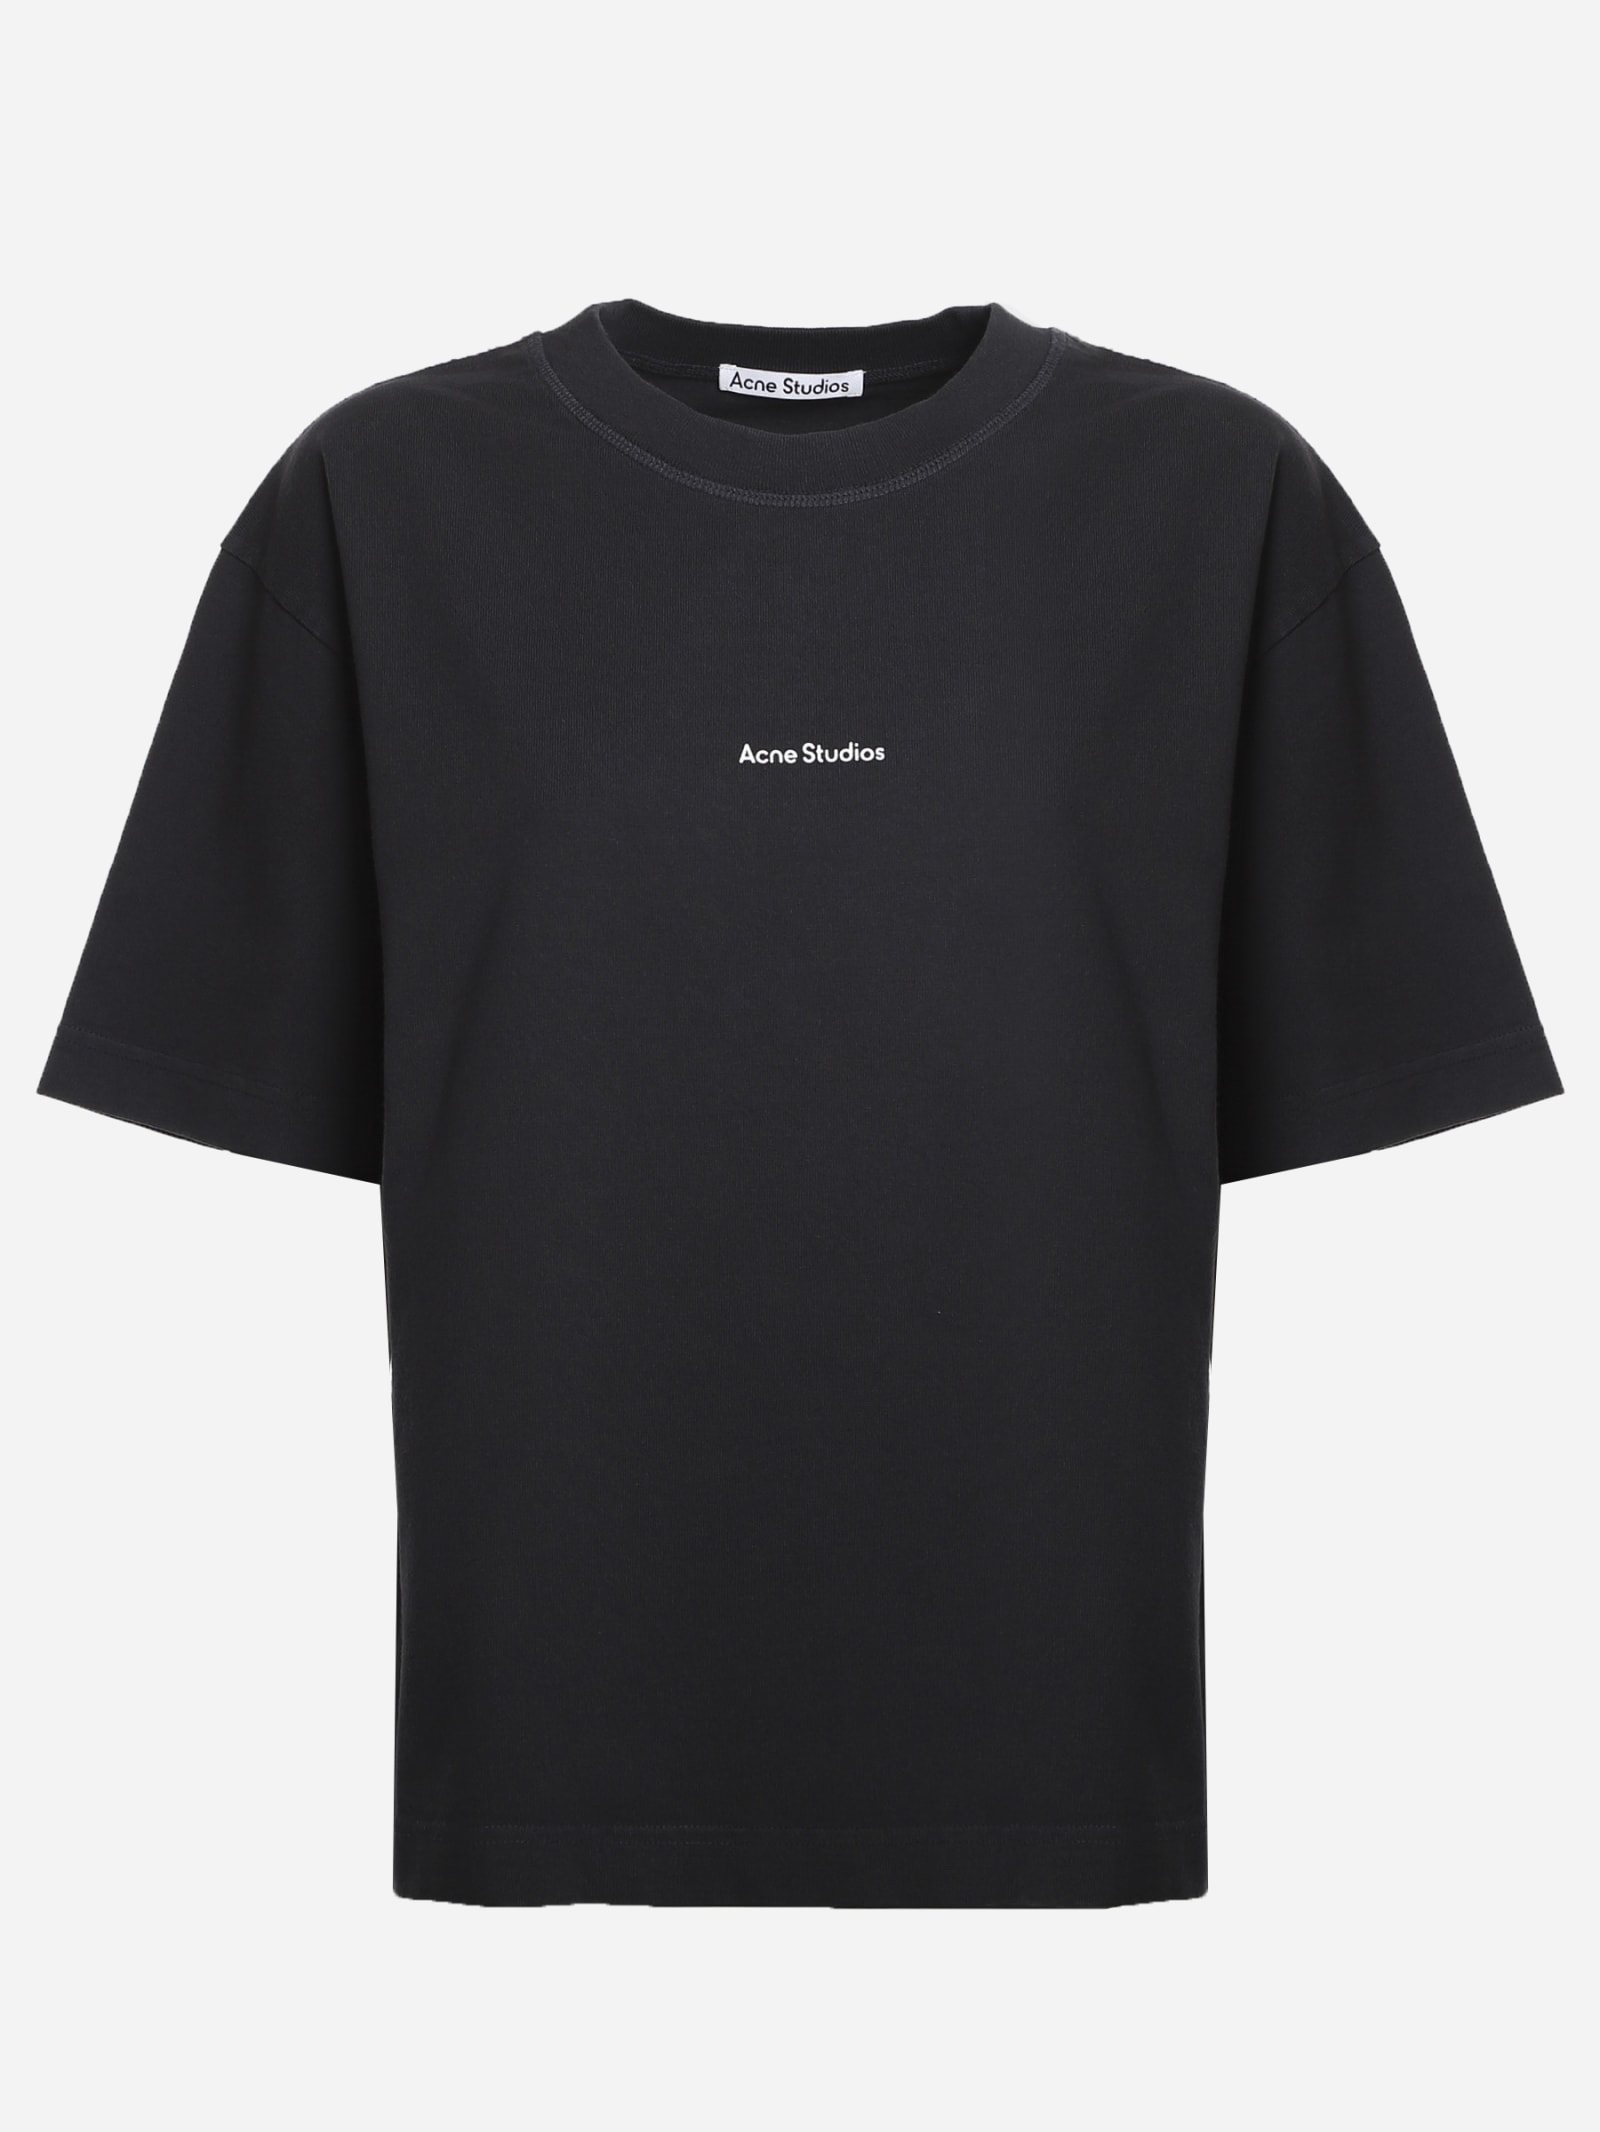 Acne Studios COTTON T-SHIRT WITH CONTRASTING LOGO PRINT